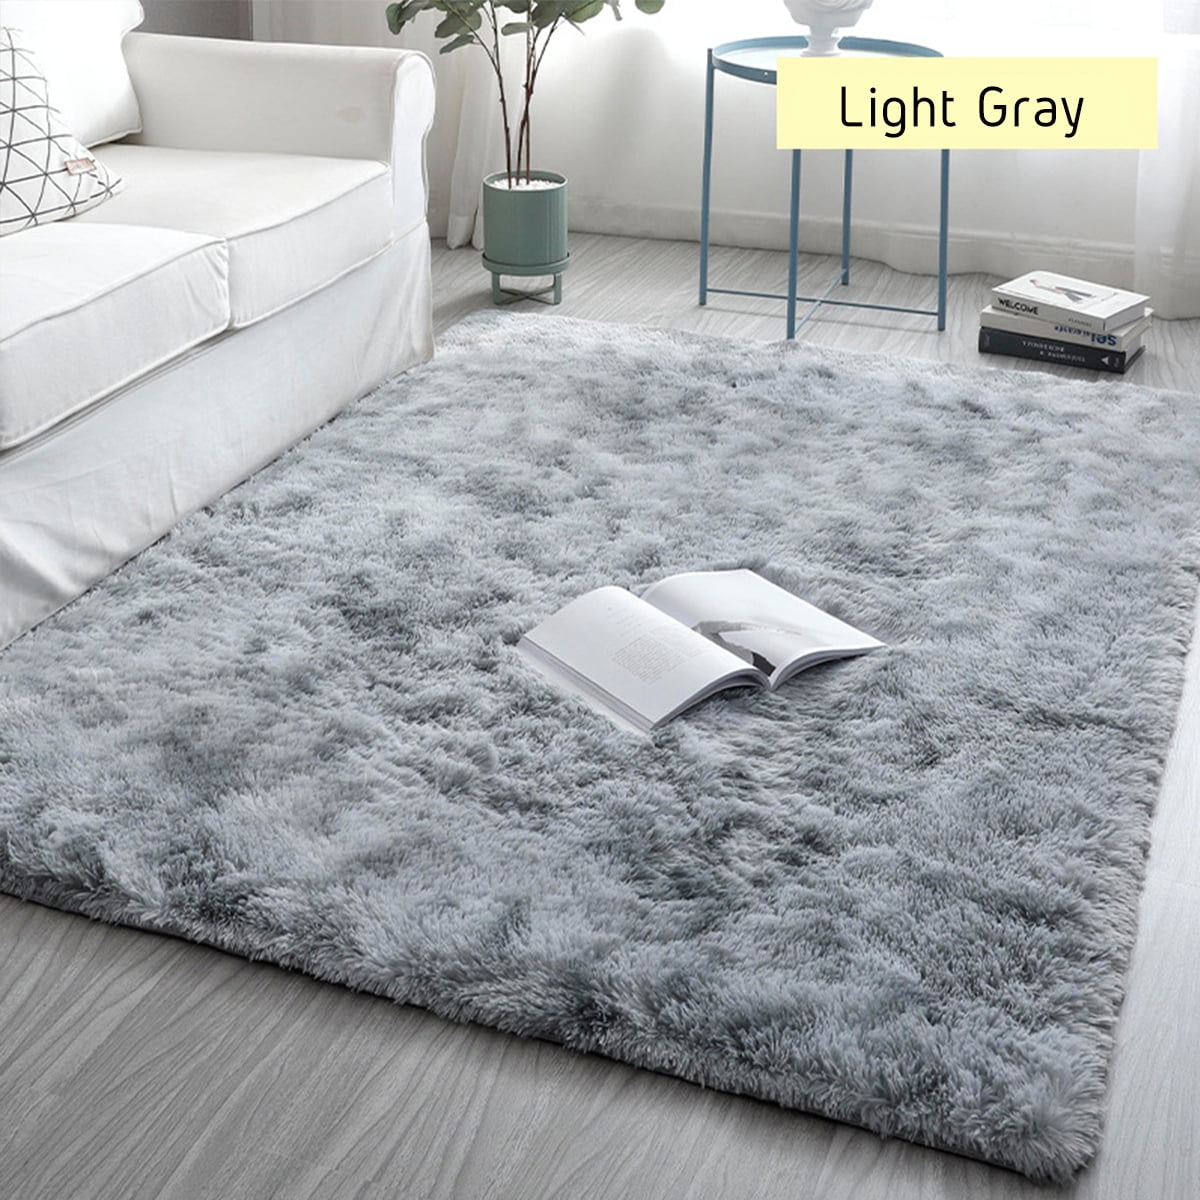 CyCoShower Round Area Rugs Warm Soft Carpets for Living Room Santa's Gift Bag on Black and White Plaid Anti-Skid Throw Rugs for Bedroom Nursery Dorm 5ft